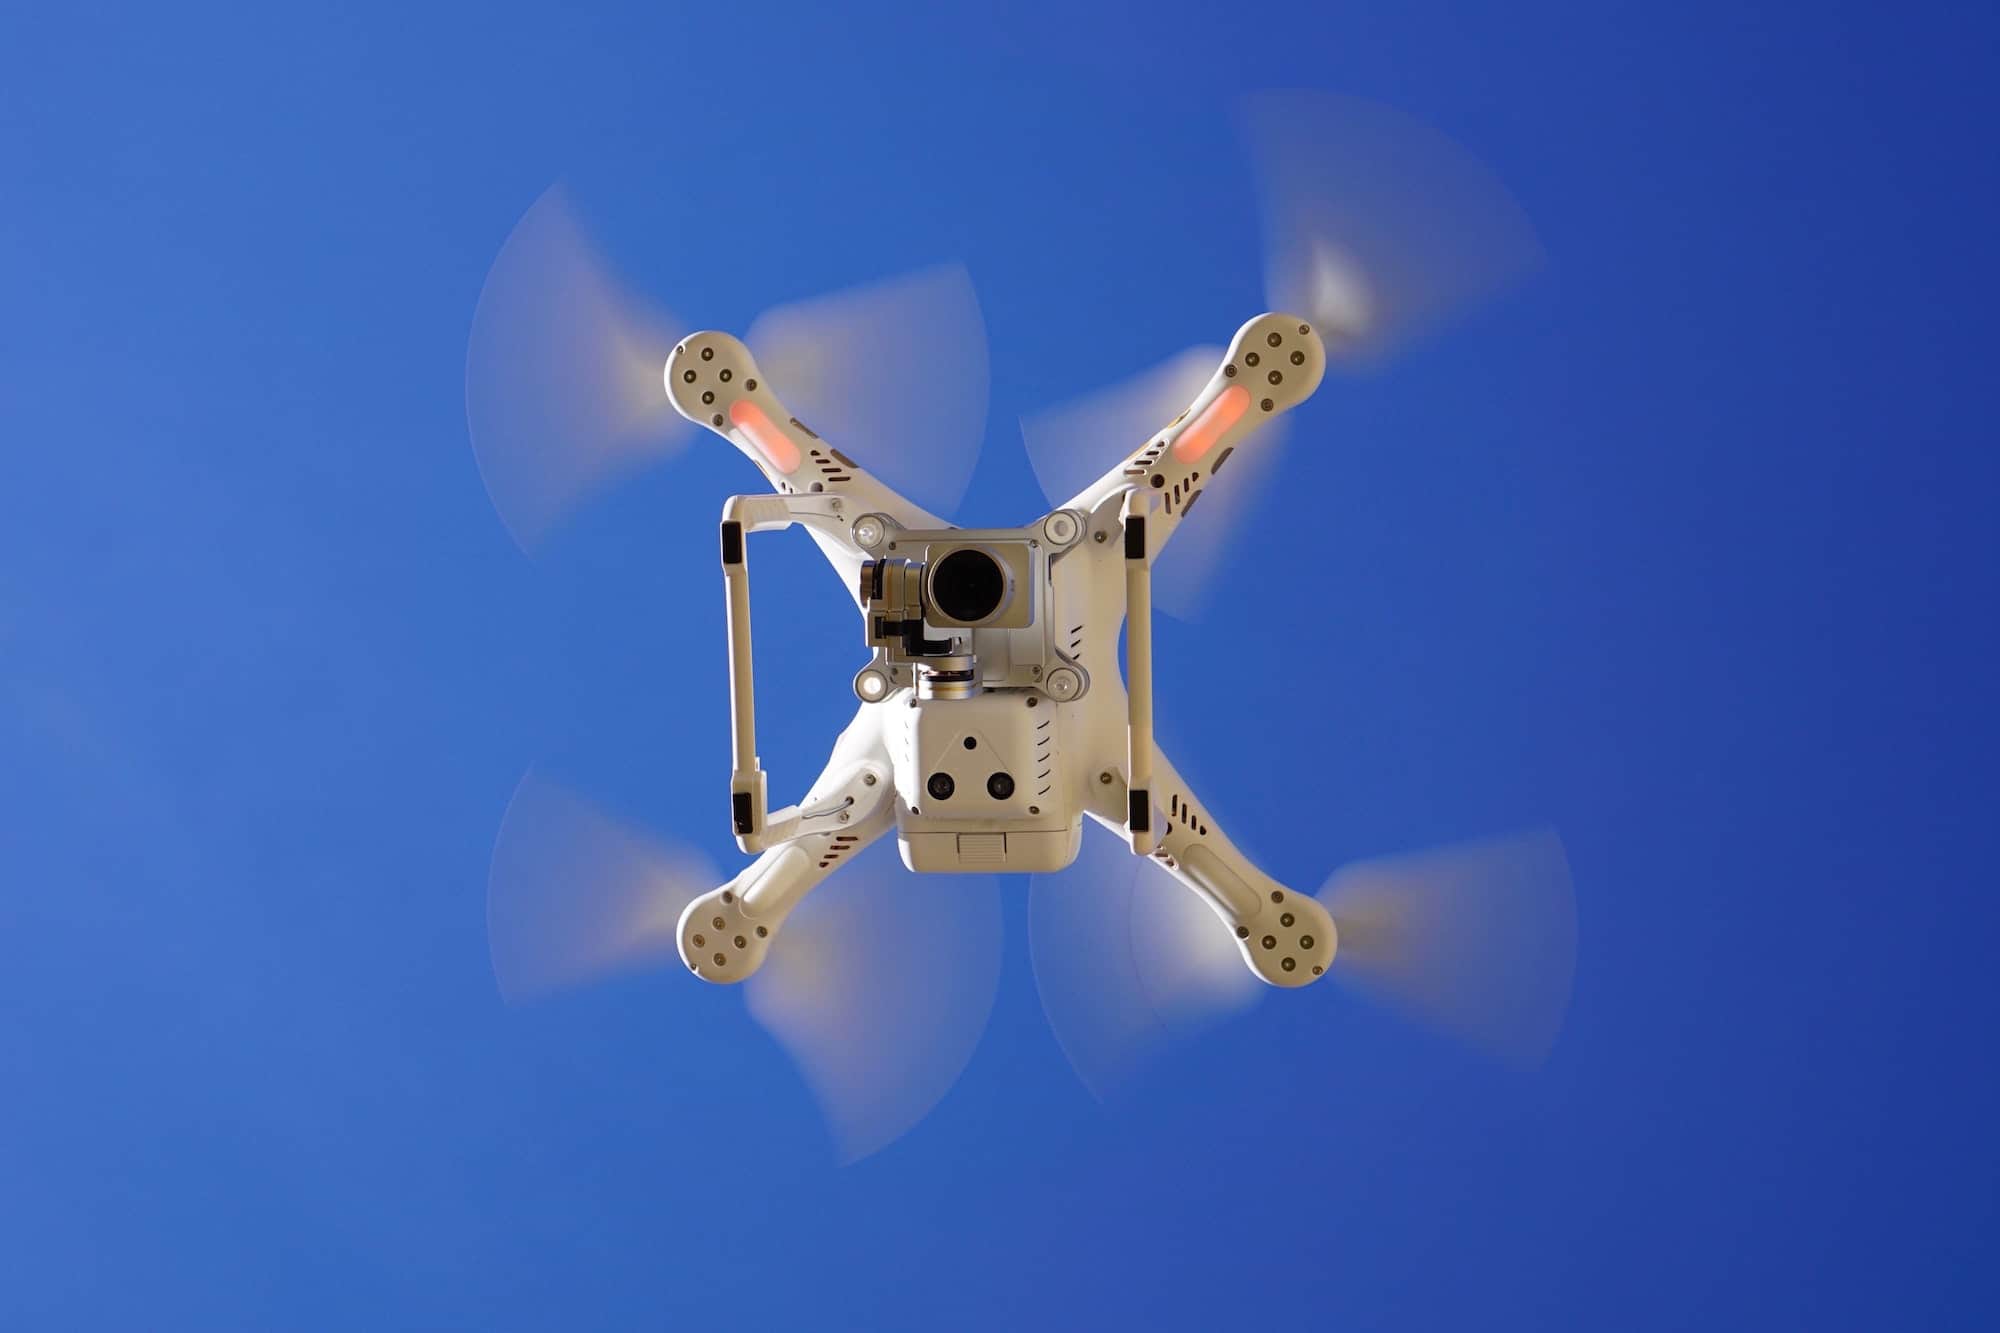 Drone Photogrammetry Surveying: Why Use Photogrammetry For Surveying And Mapping?